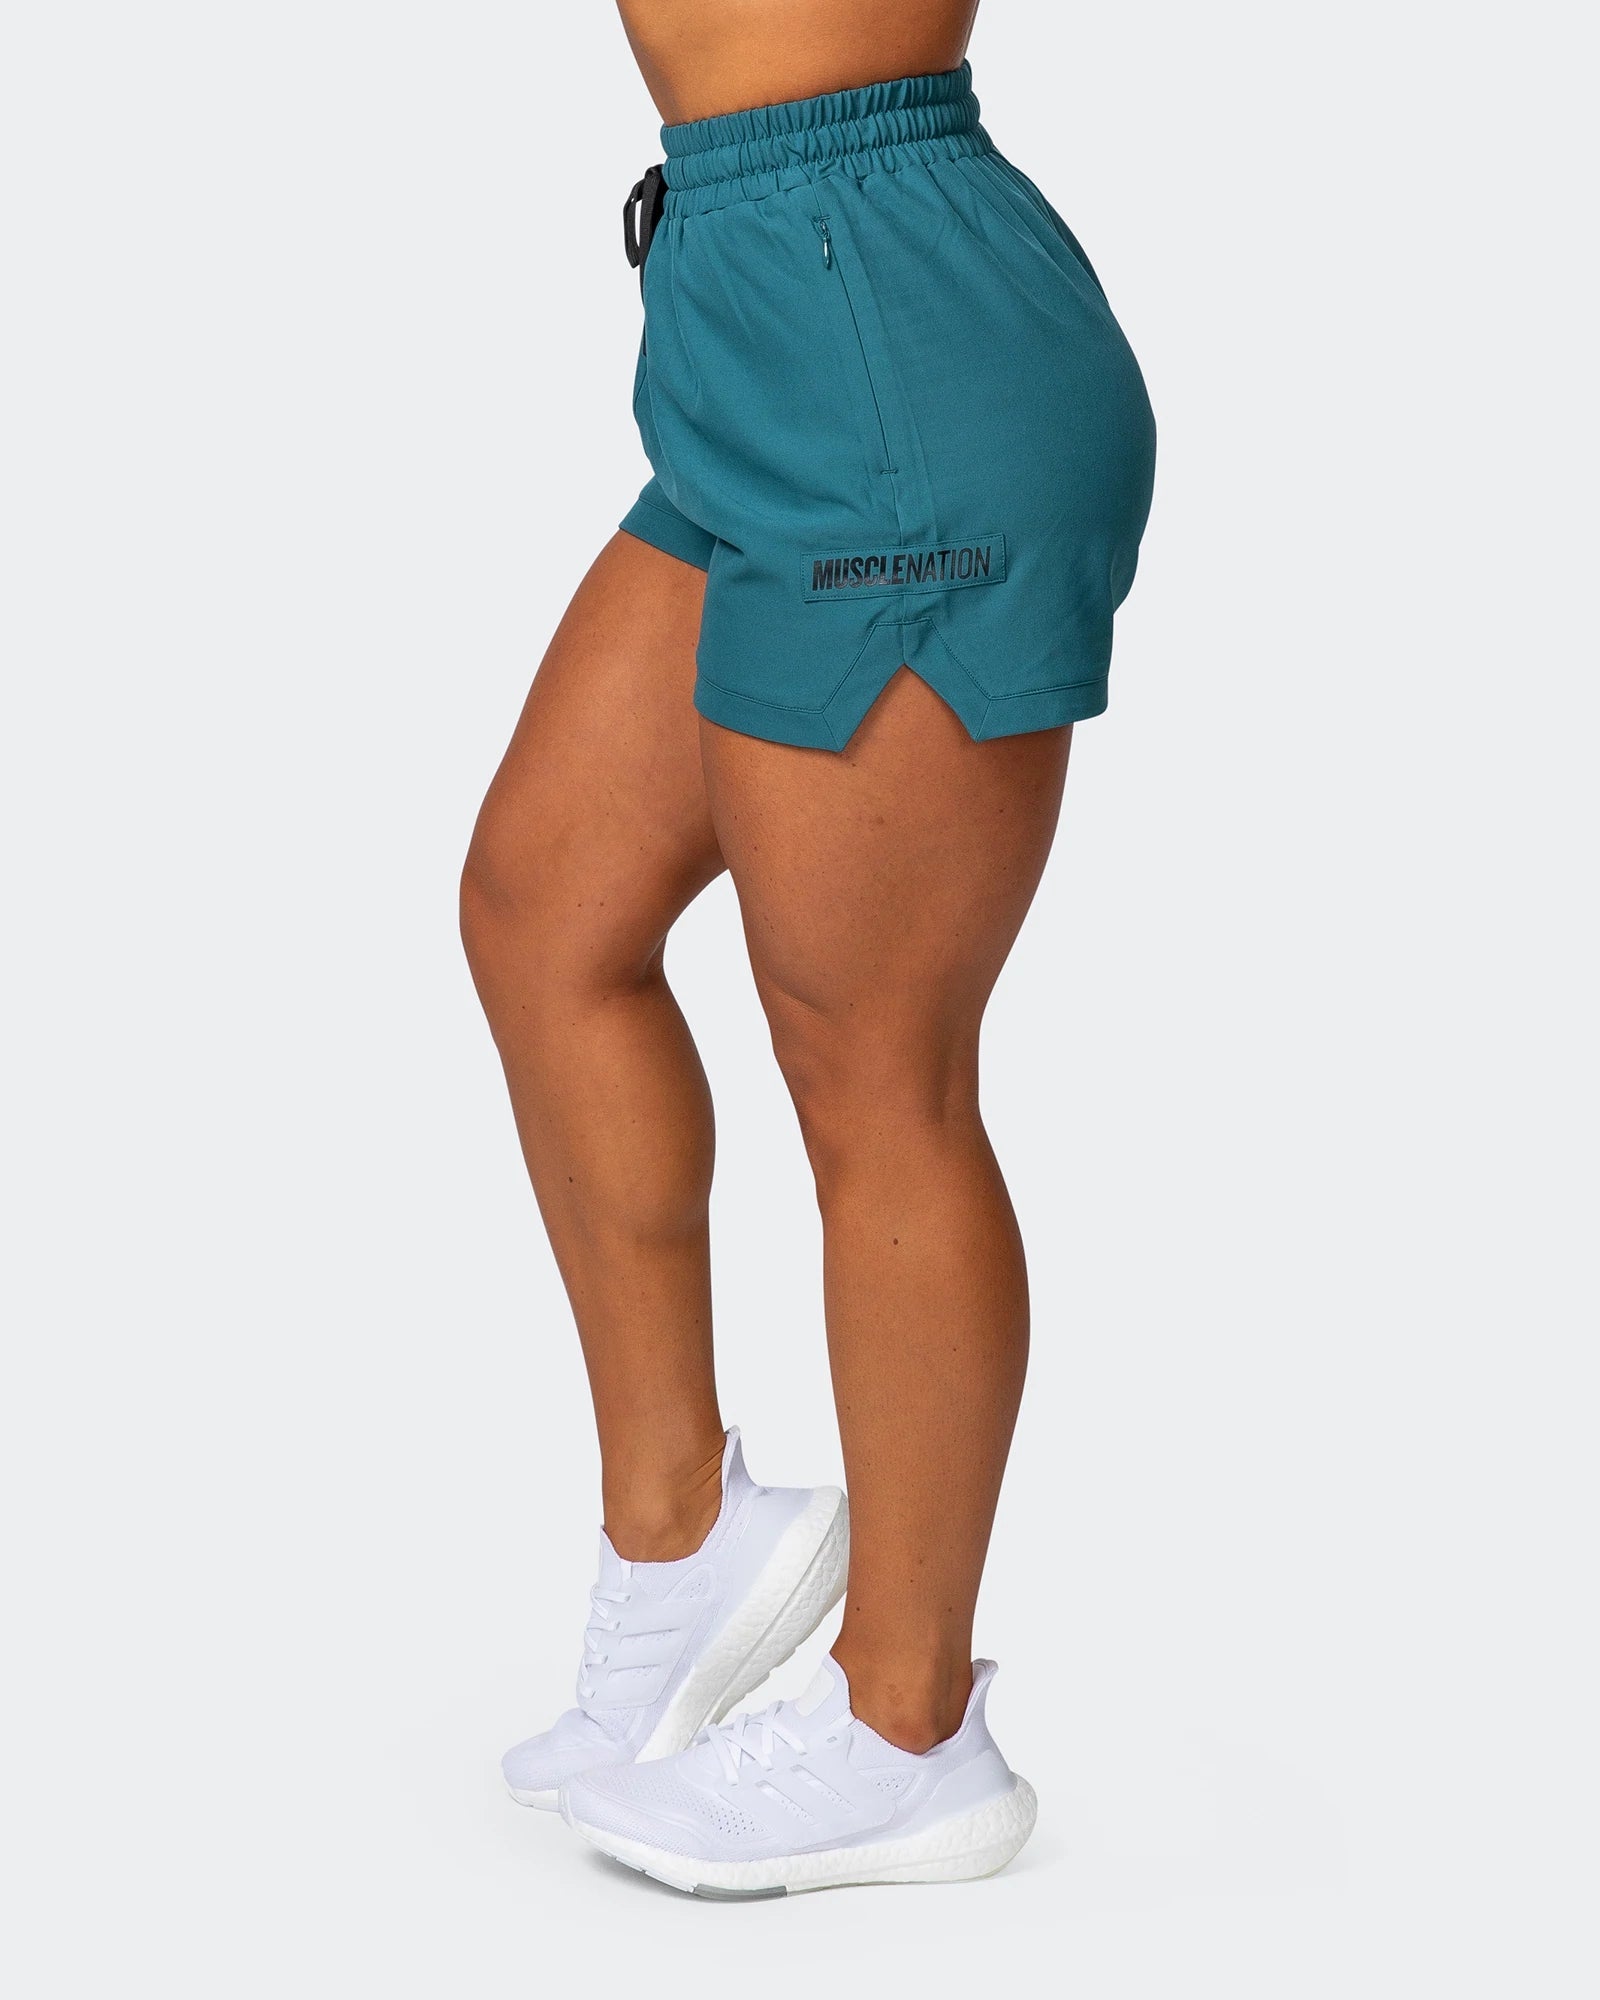 musclenation Shorts WOMENS ELEVATE ACTIVE SHORTS Deep Teal